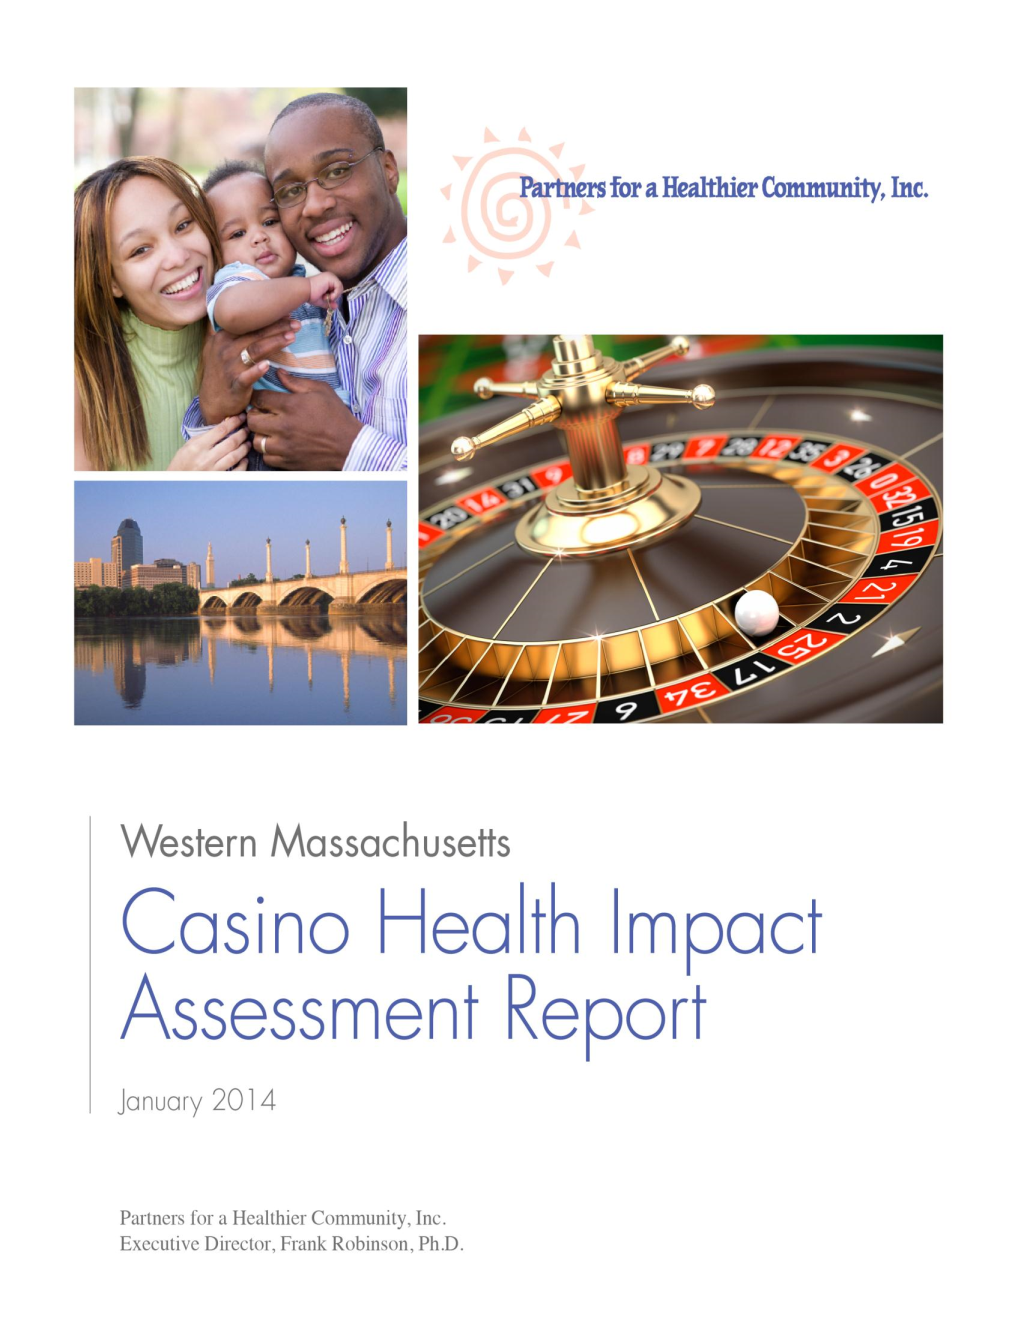 View the Full Casino Health Impact Assessment Report